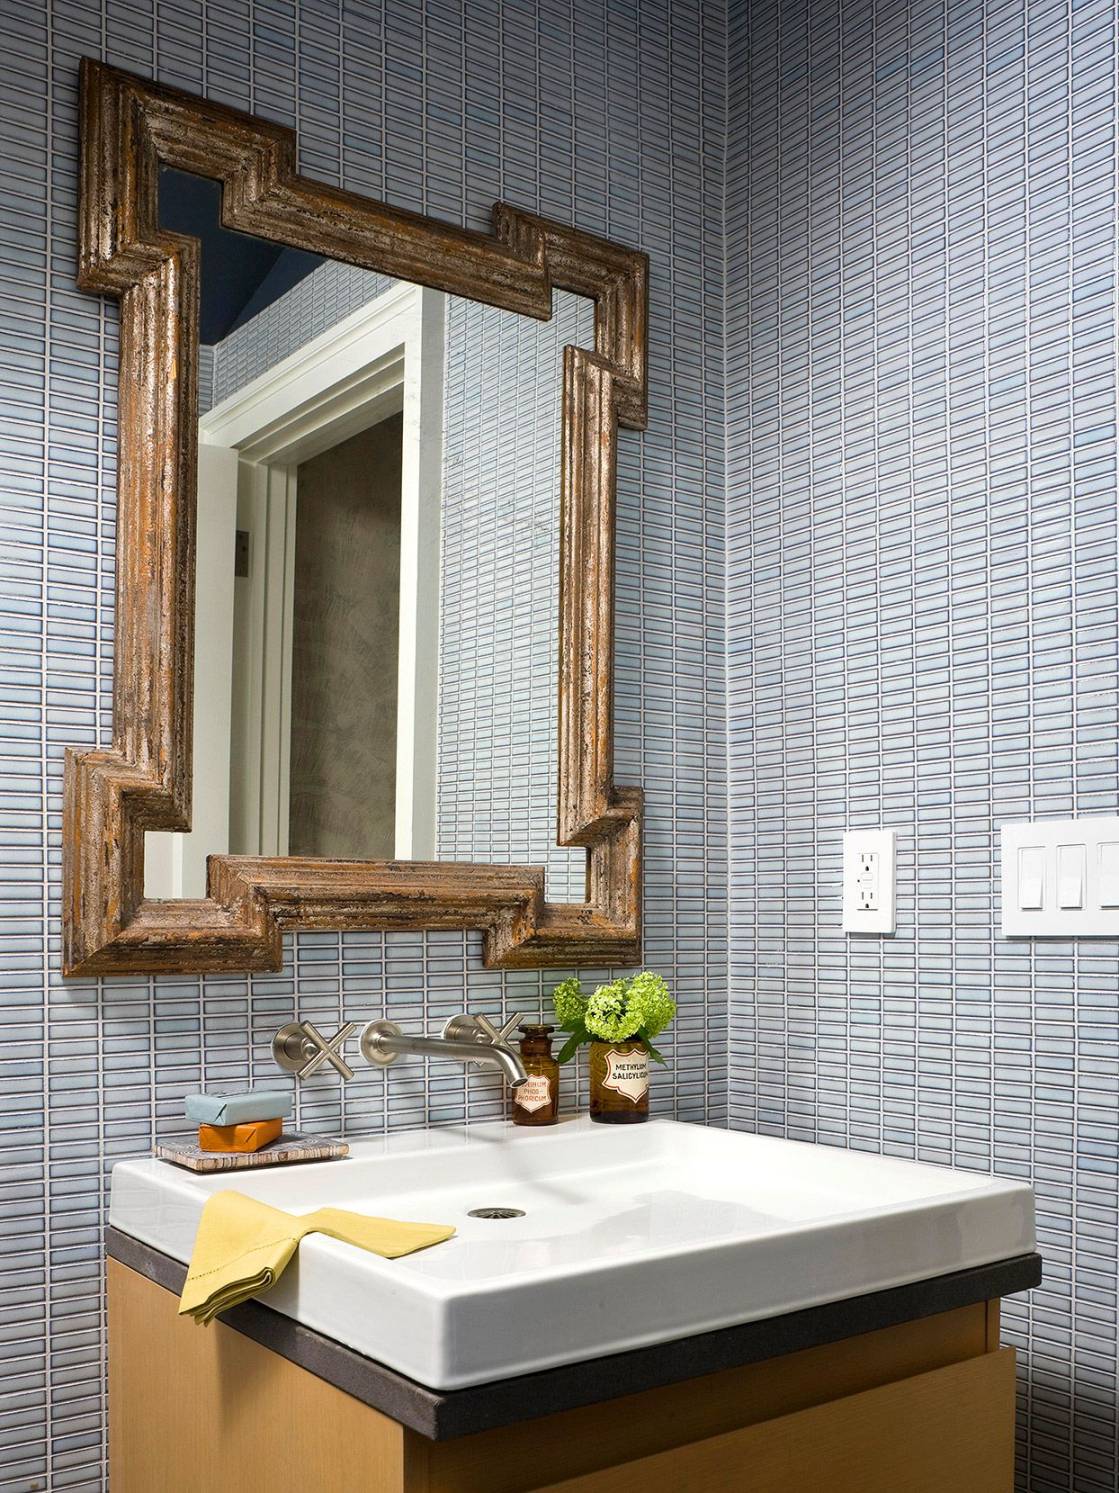 Powder Room Ideas That Pack Style into a Small Space